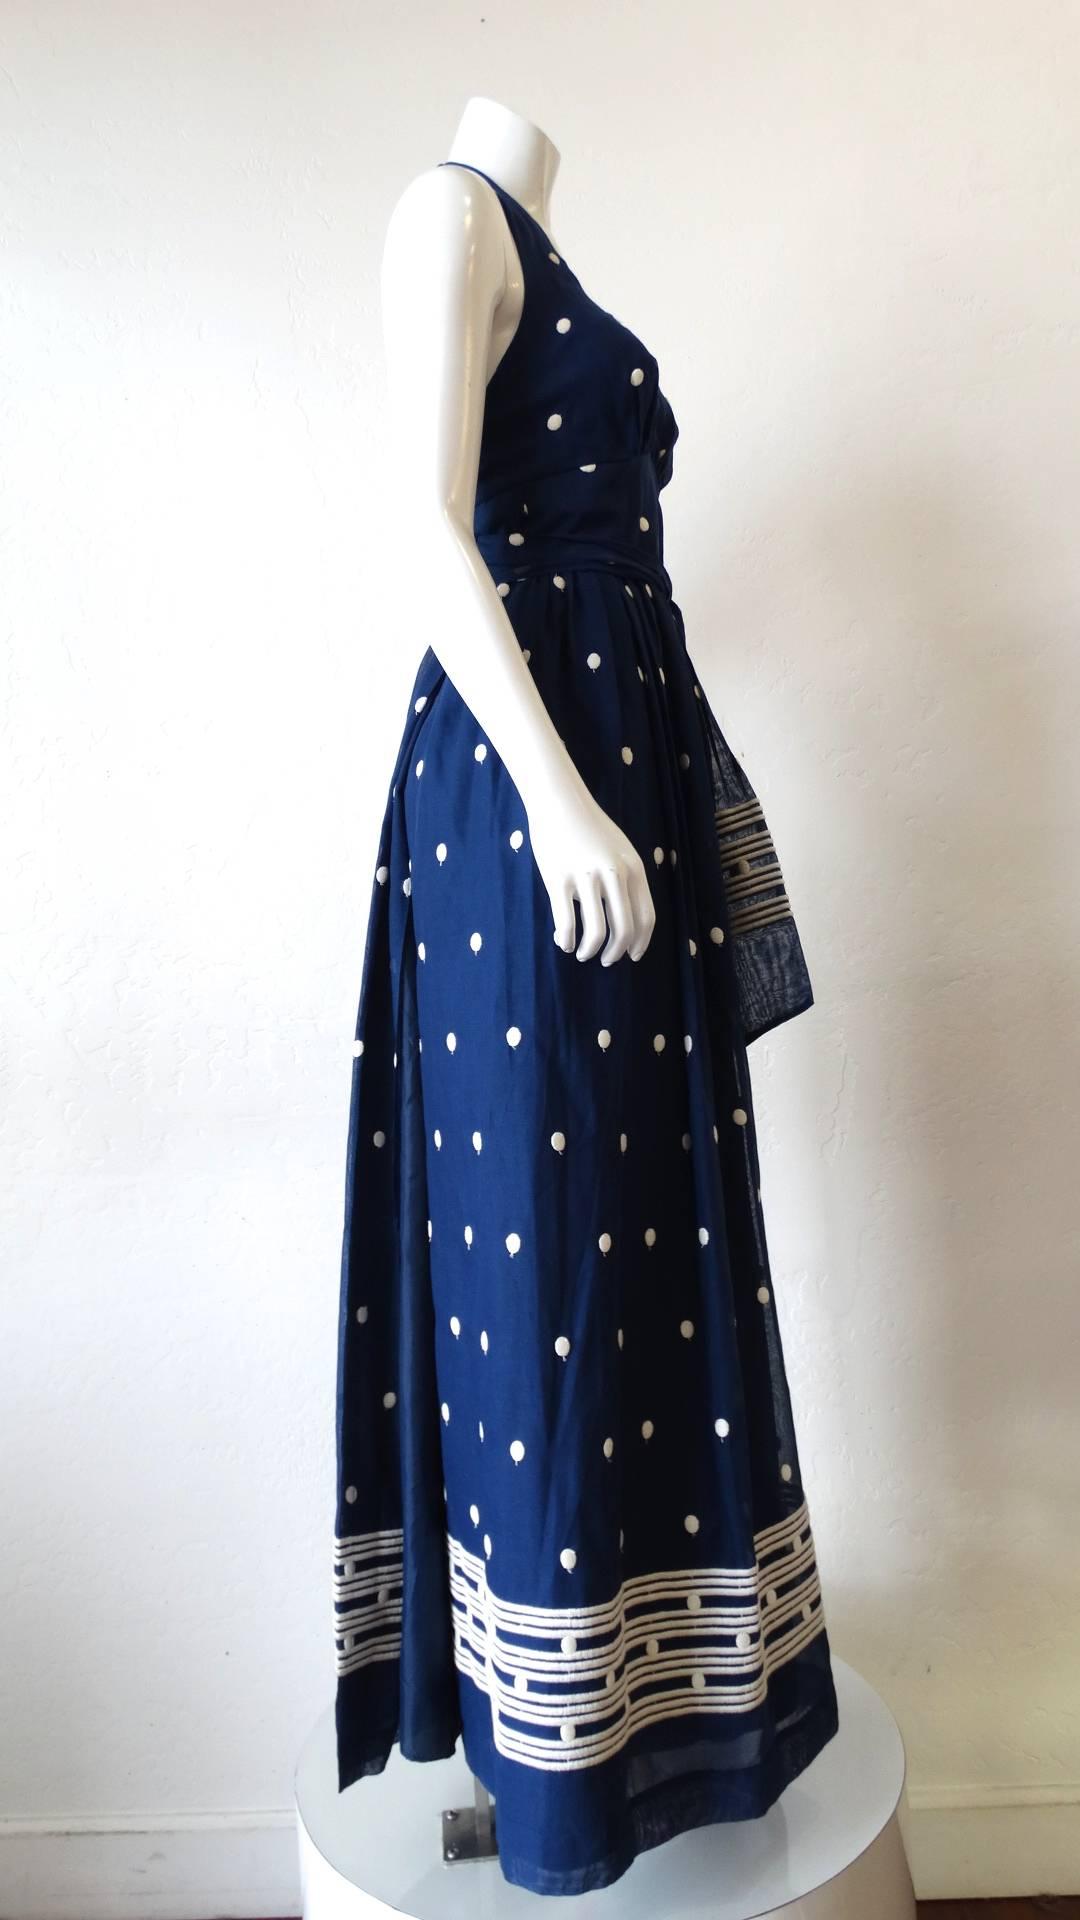 Your perfect summer frock has arrived! From California designer Miss Elliette, this piece is straight out of the 1970s! Made of a solid blue cotton fabric embroidered with a white polka dot print and stripes along the hem/sash. Matching sash ties